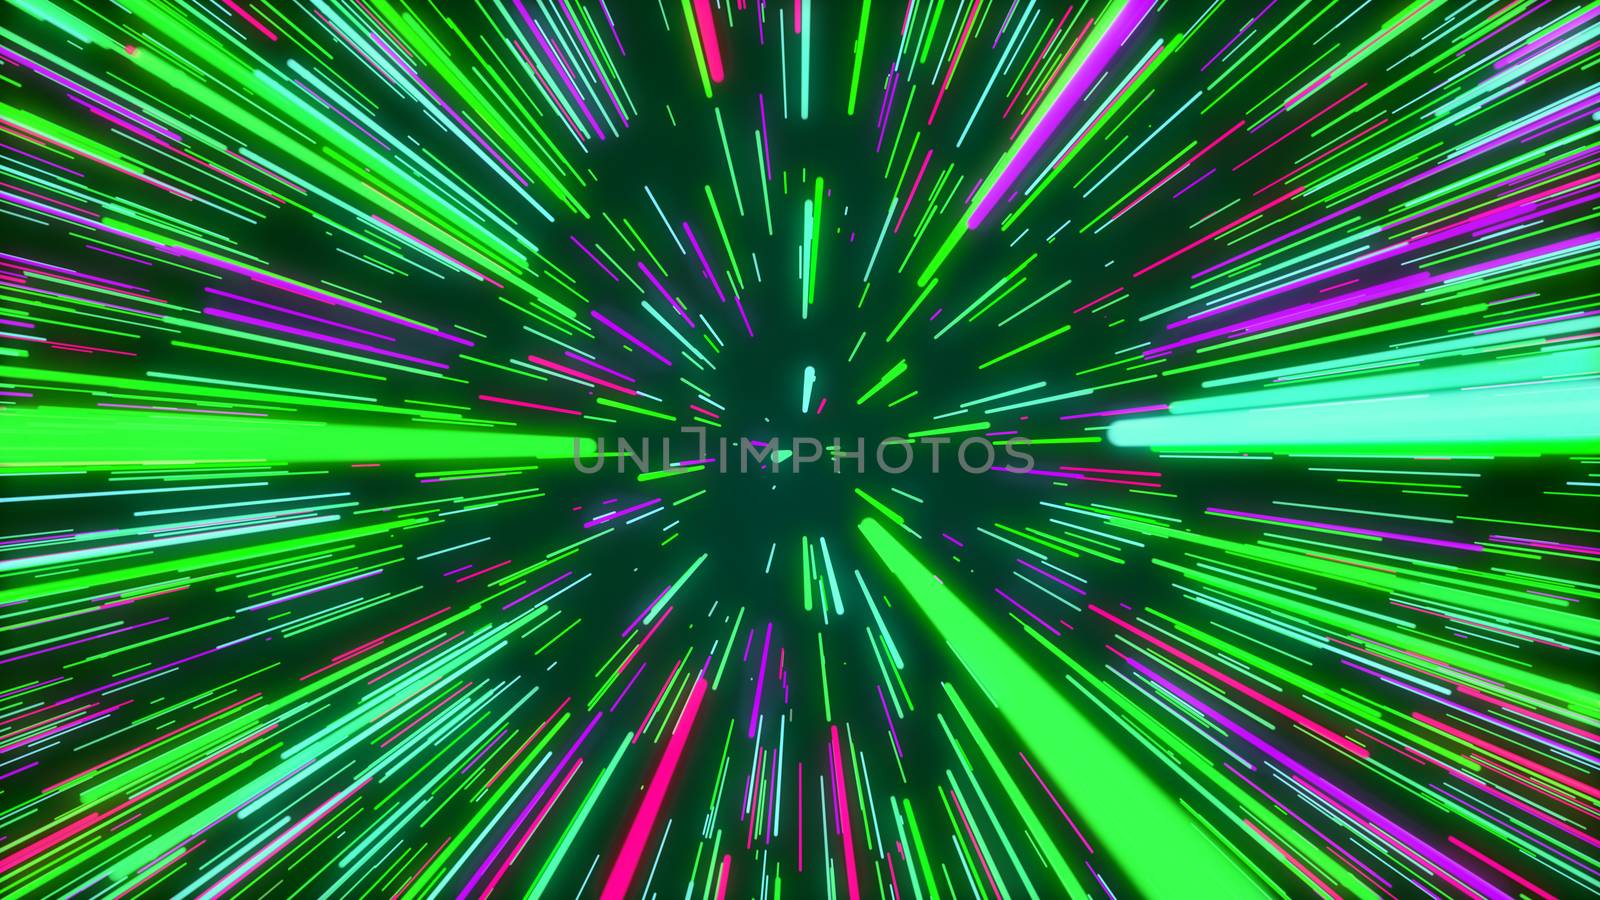 Childish 3d illustration of a multicolored cyber Universe portal from rainbow straight stripes looking like sun rays beaming cheery in the marine space.